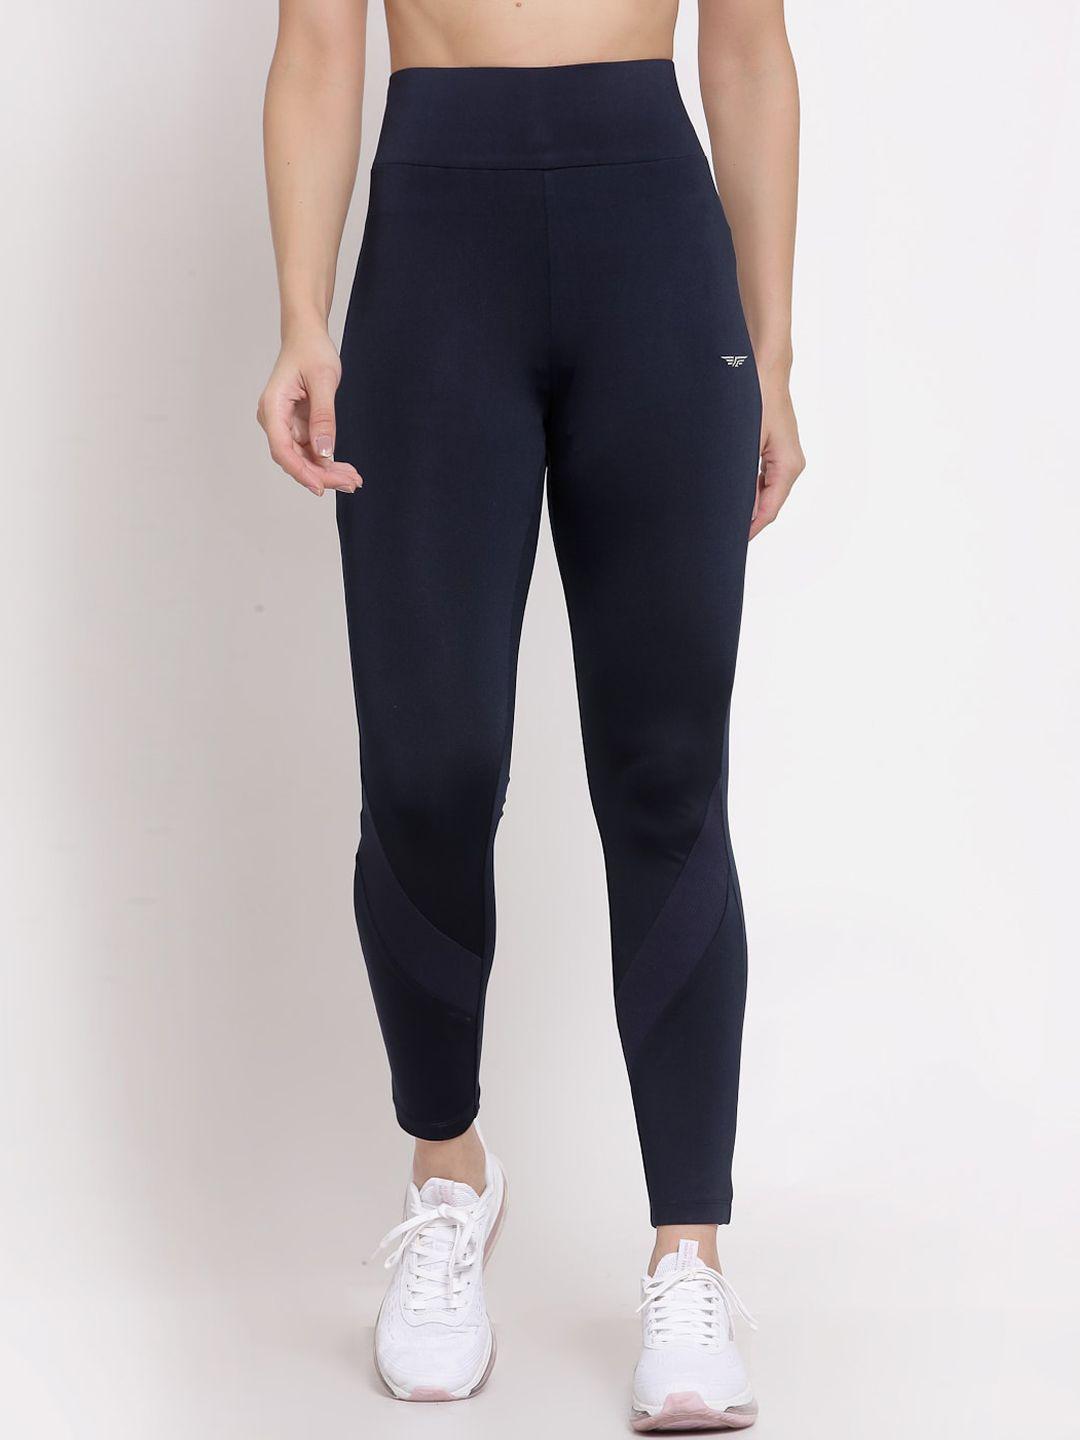 red tape women navy blue solid sports tights